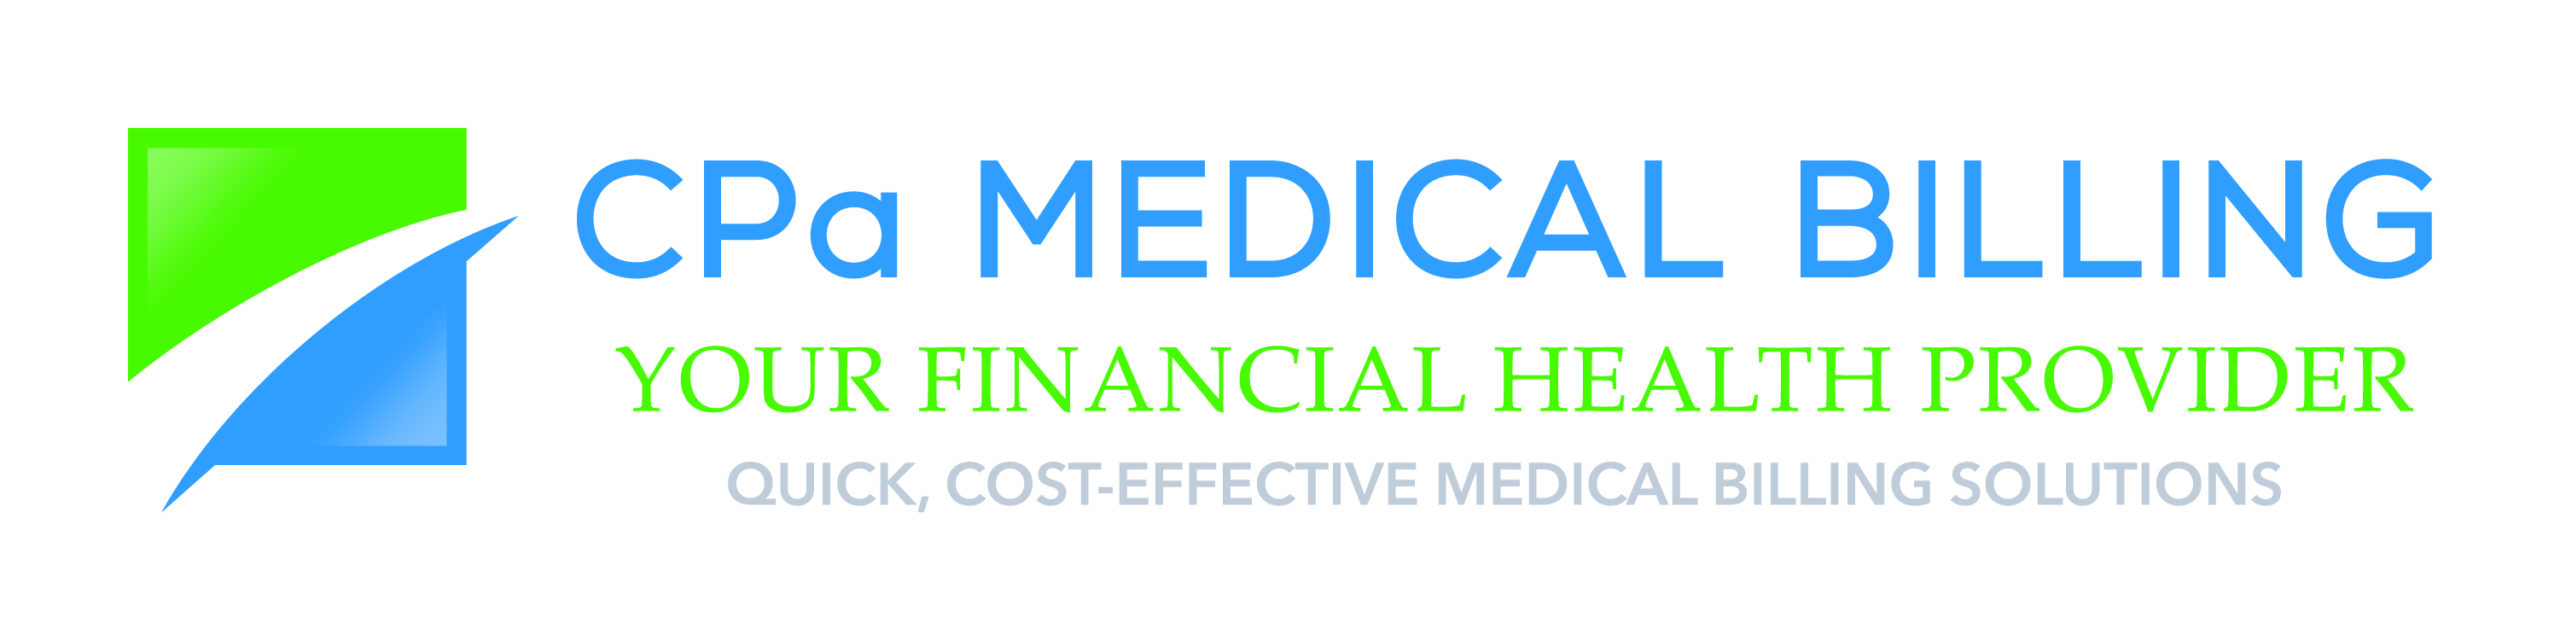 Medical Billing, Credentialing and Consulting | CPa Medical Billing